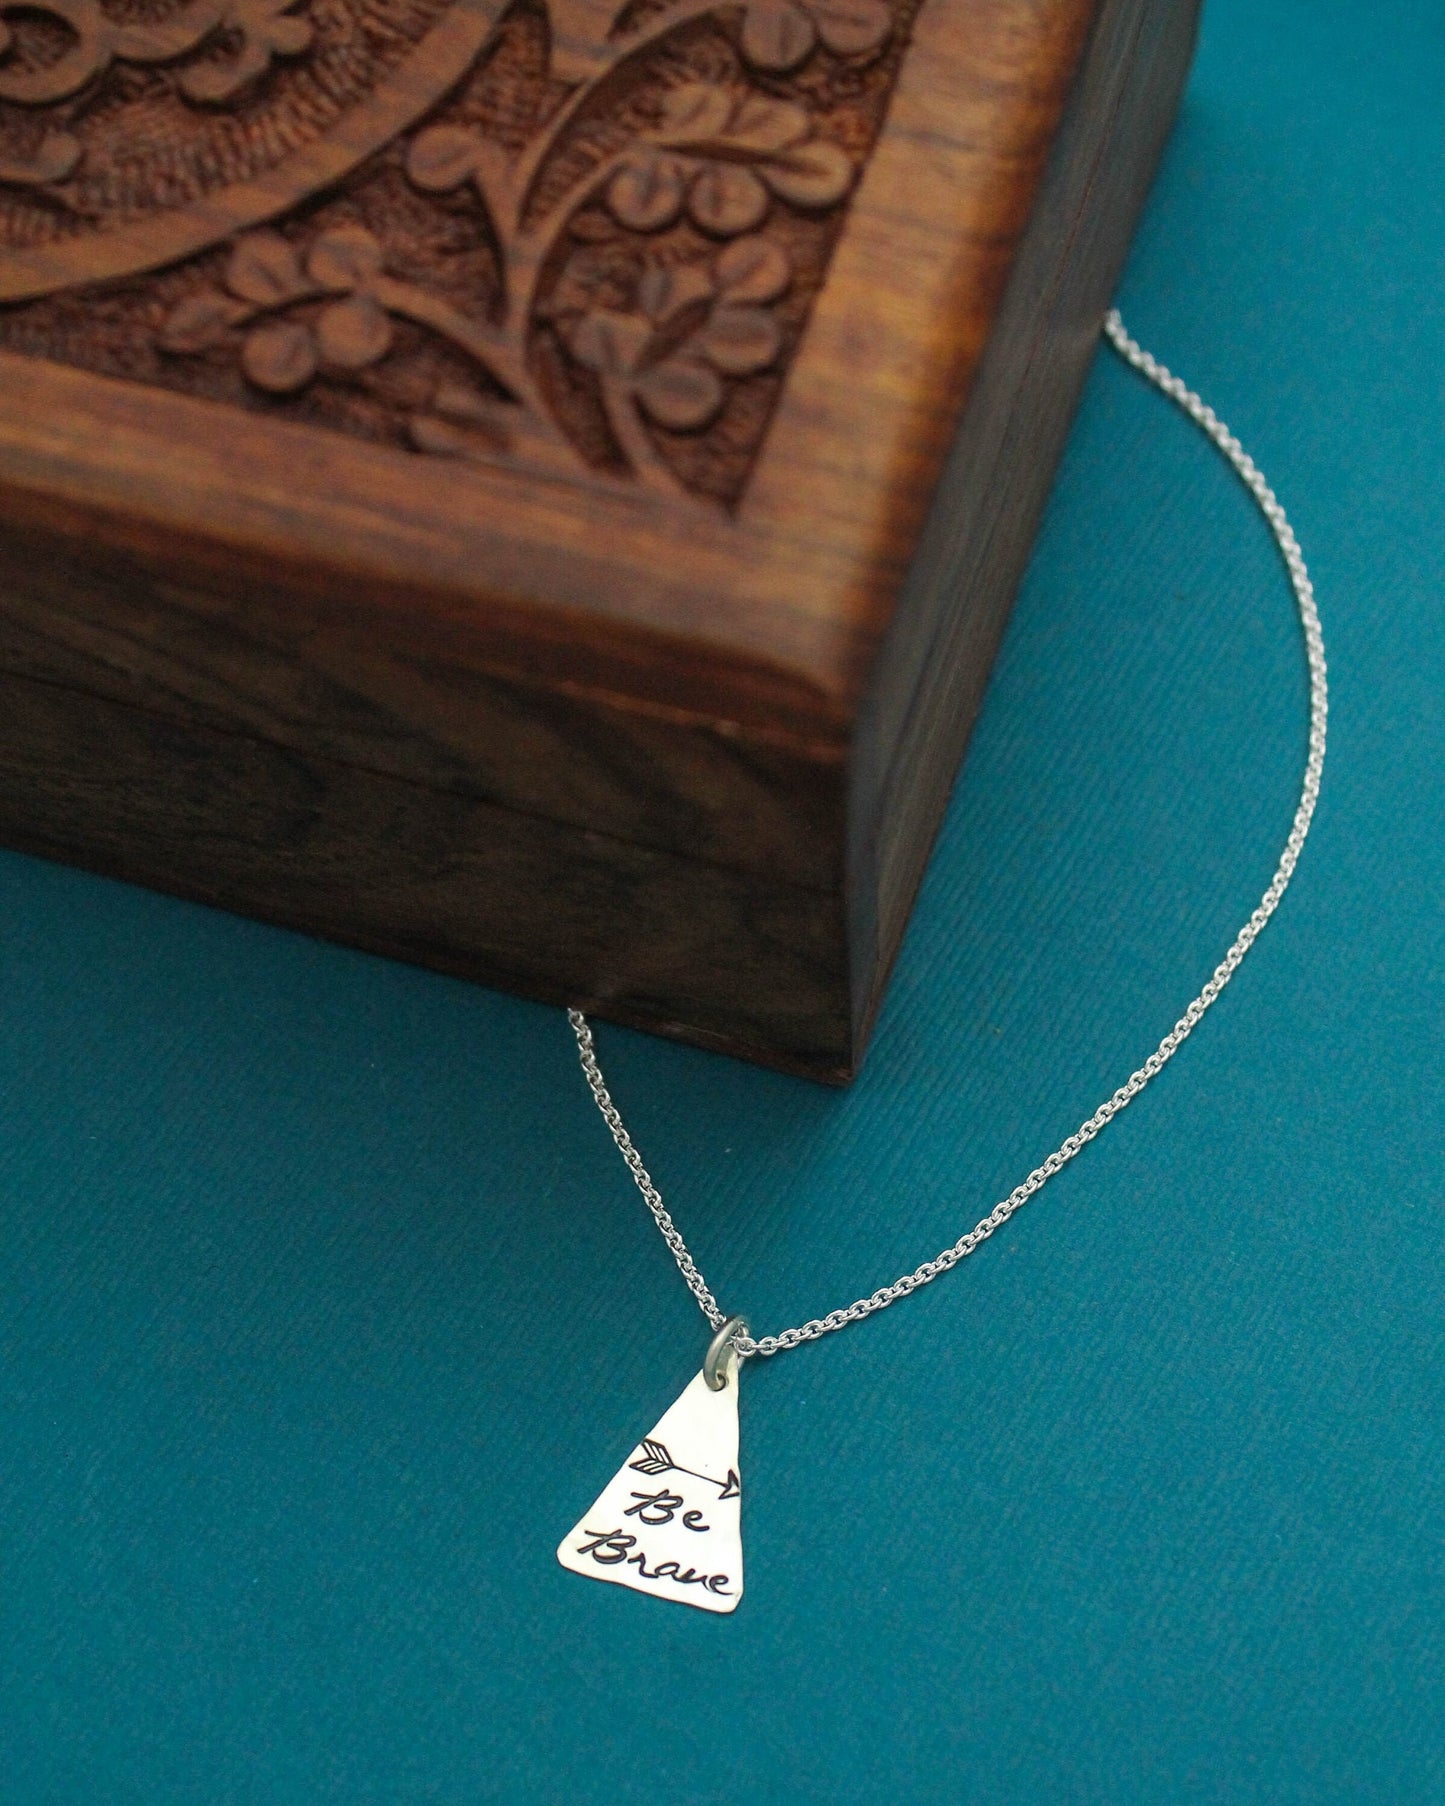 Be Brave Necklace in Sterling Silver Hand Stamped